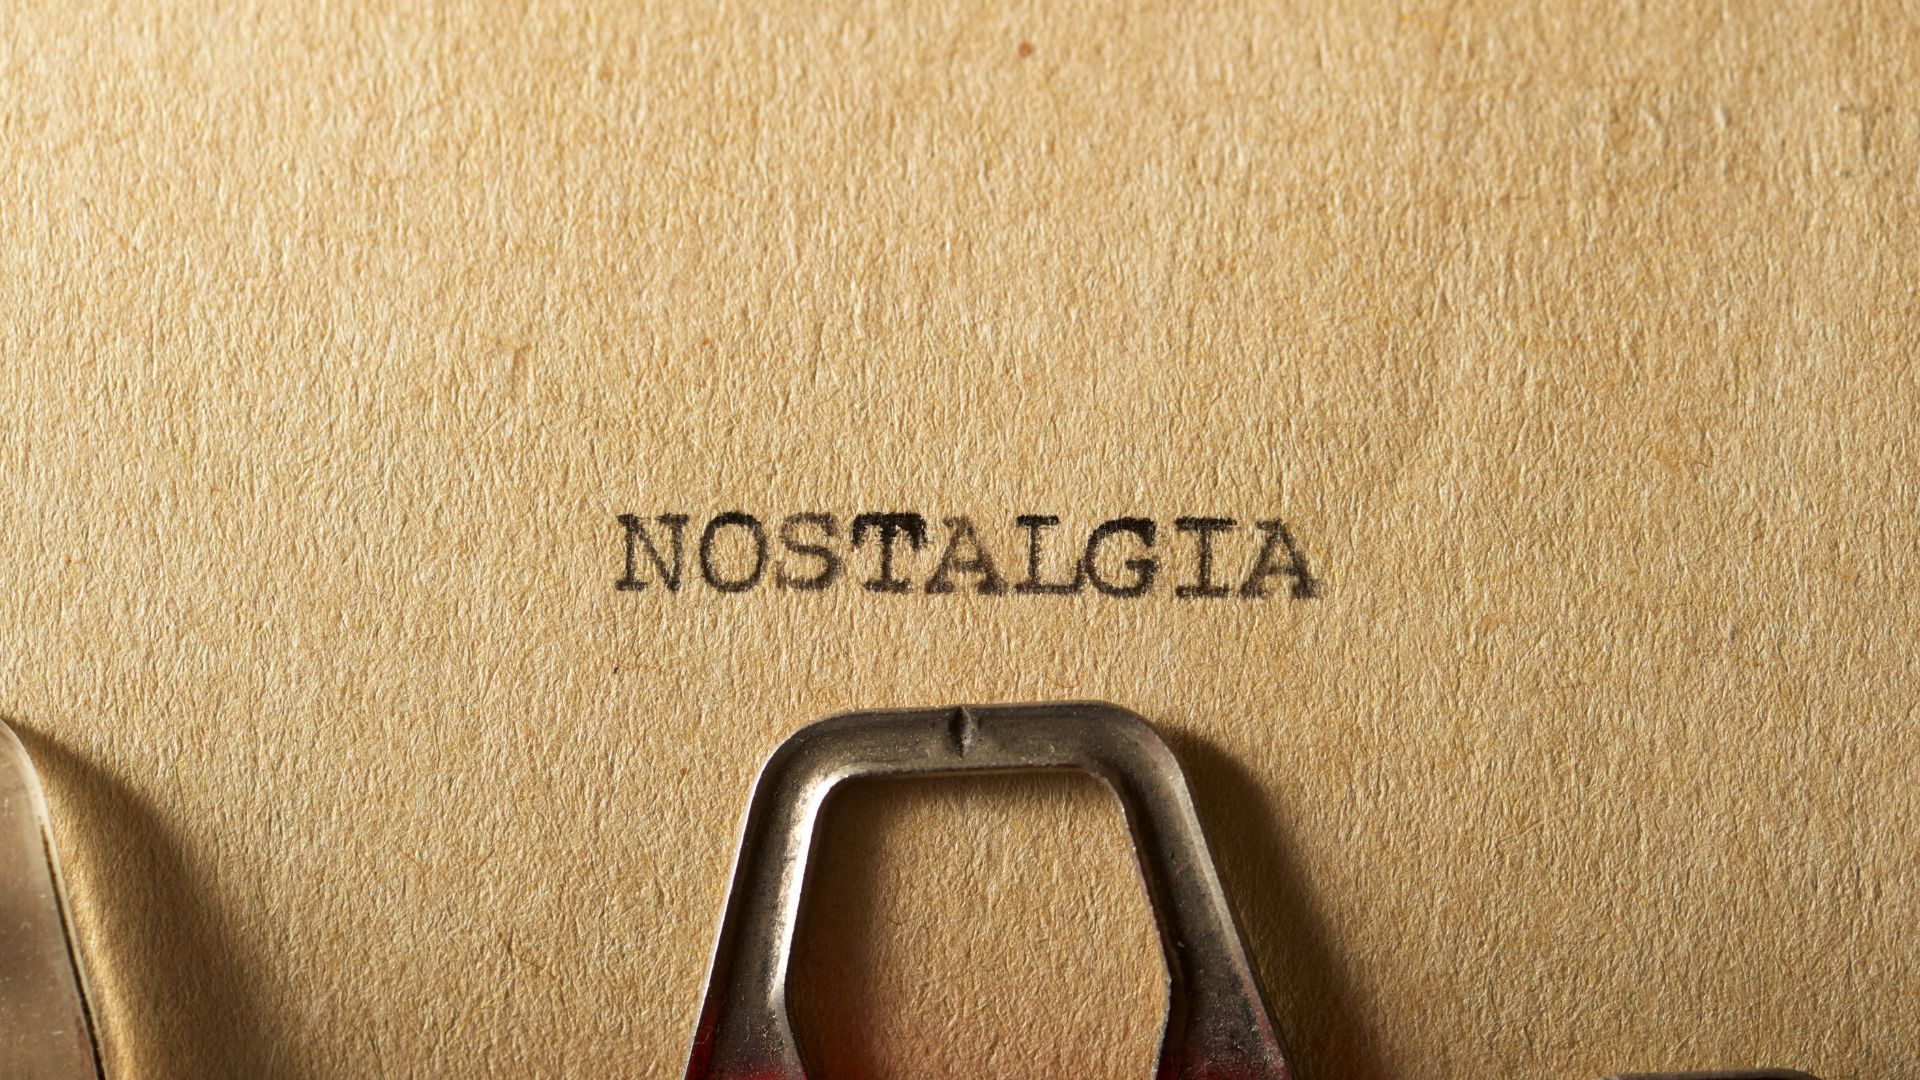 Warhammer fans hate change and when things stay the same - the word NOSTALGIA on brown paper in a typewriter